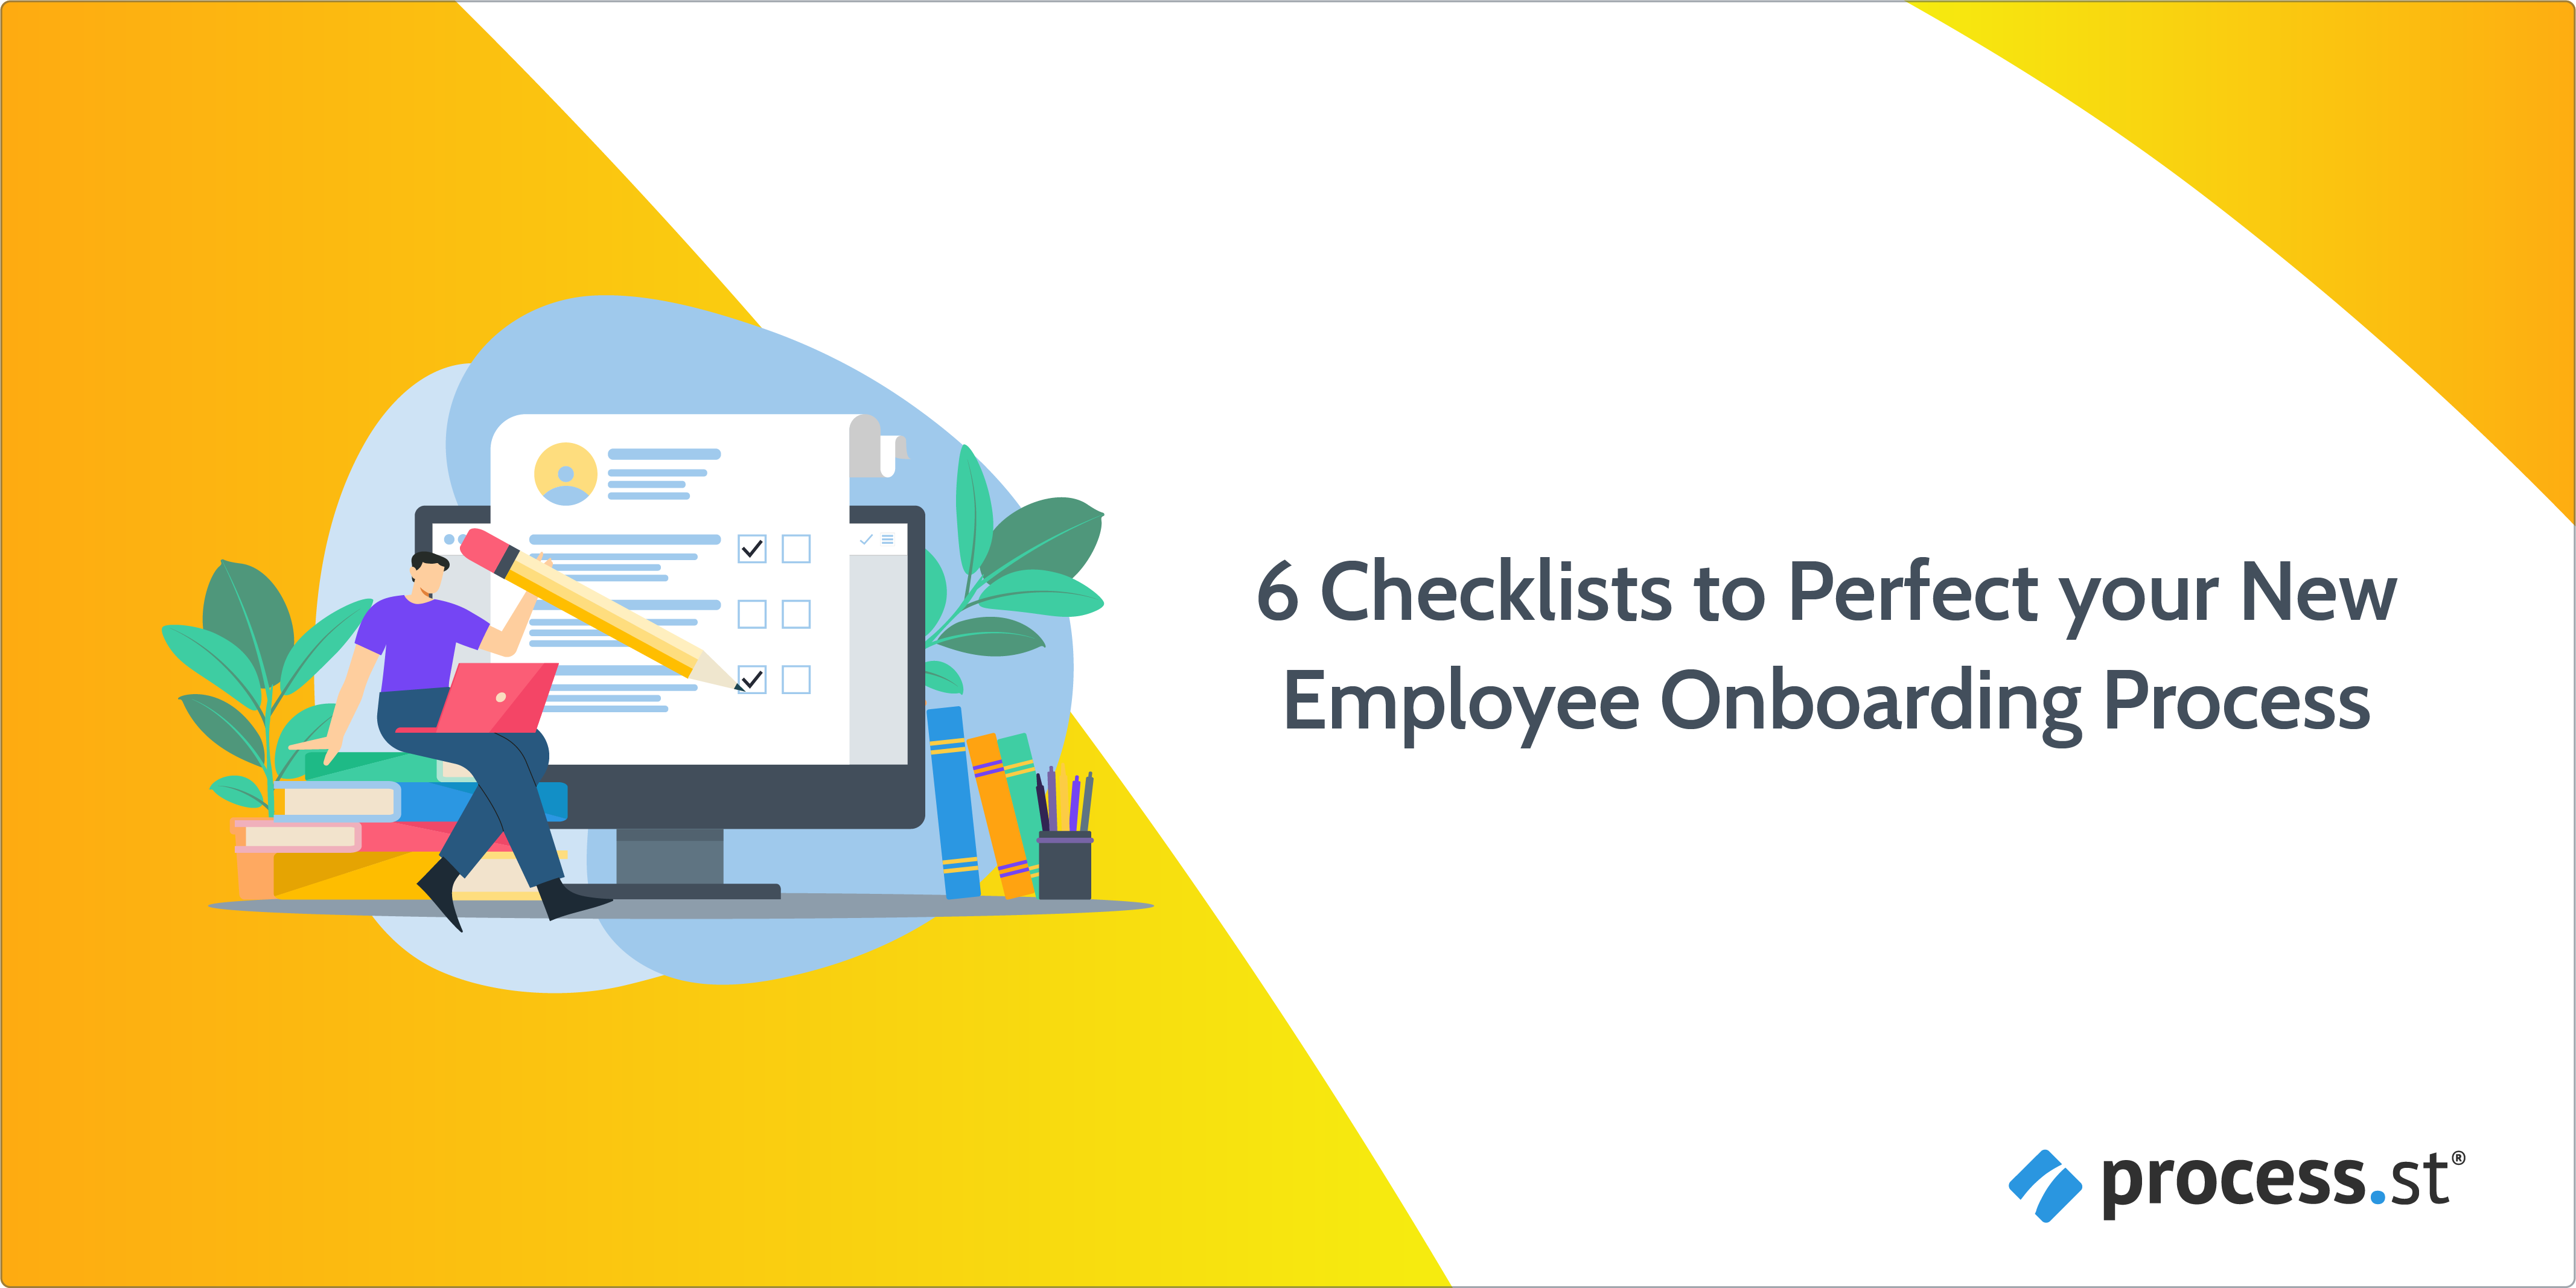 6 Checklists to Perfect your New Employee Onboarding Process